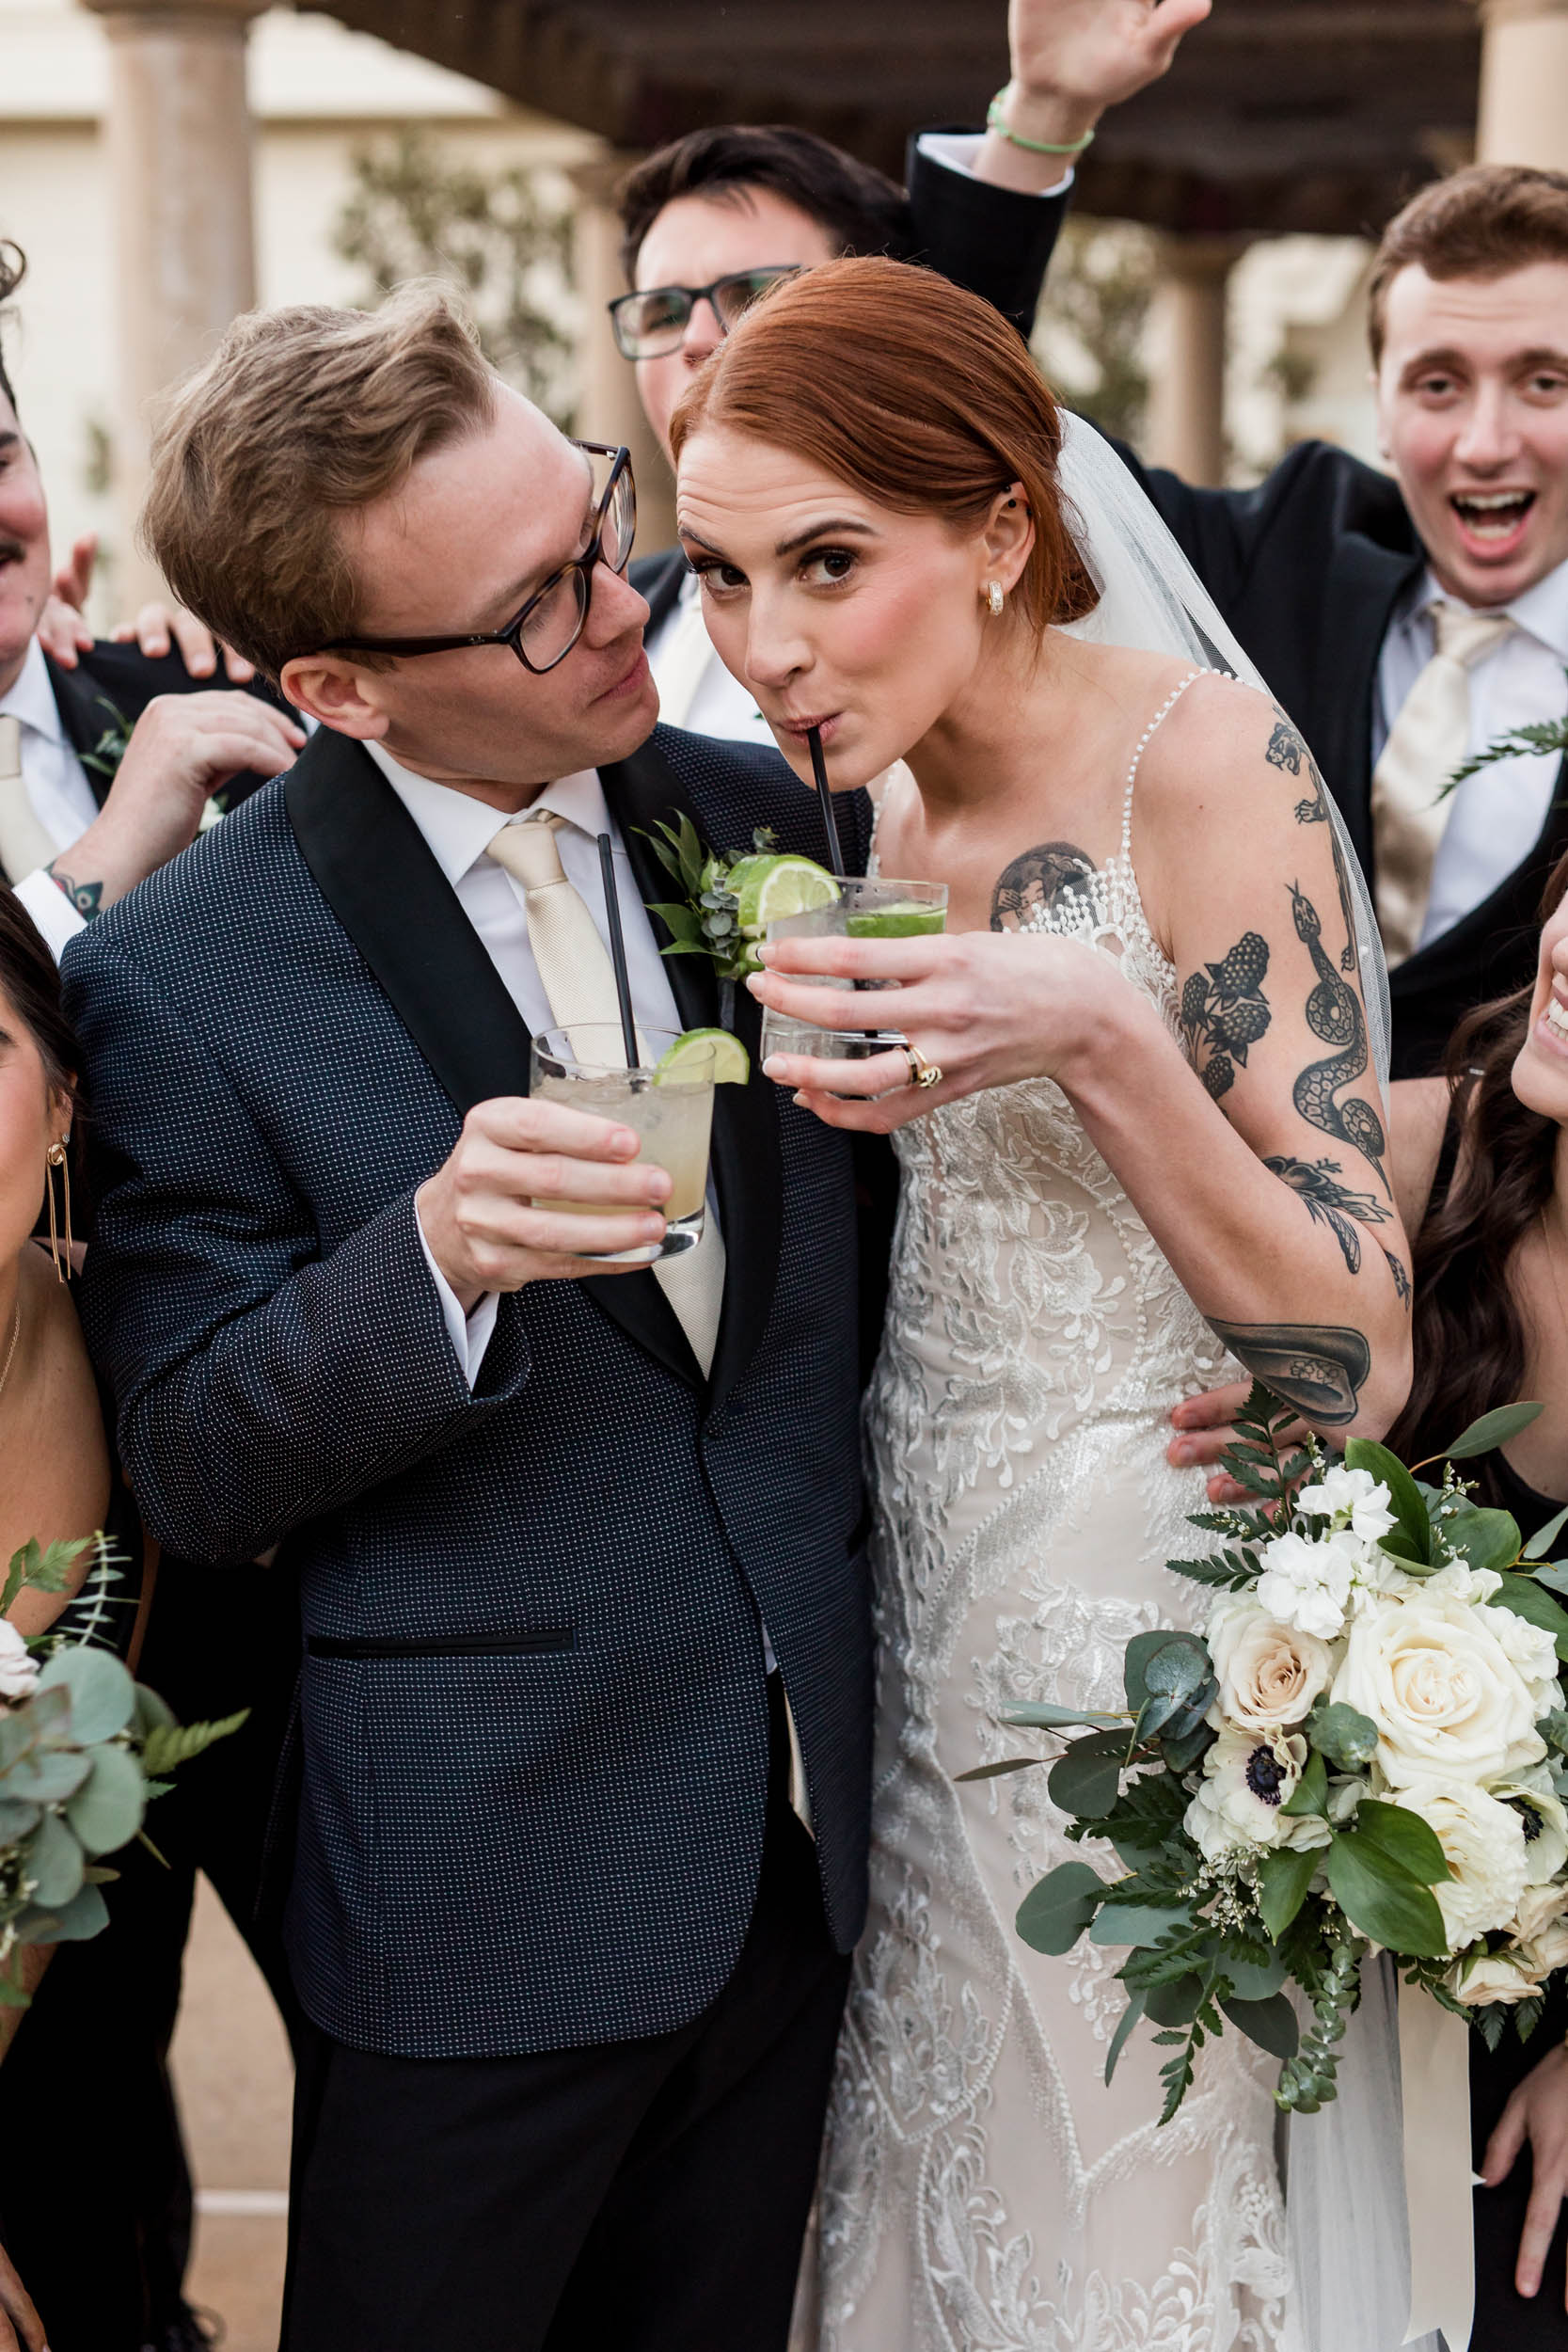 Bride Sipping Cocktail Playfully Groom Wedding Party Celebrating